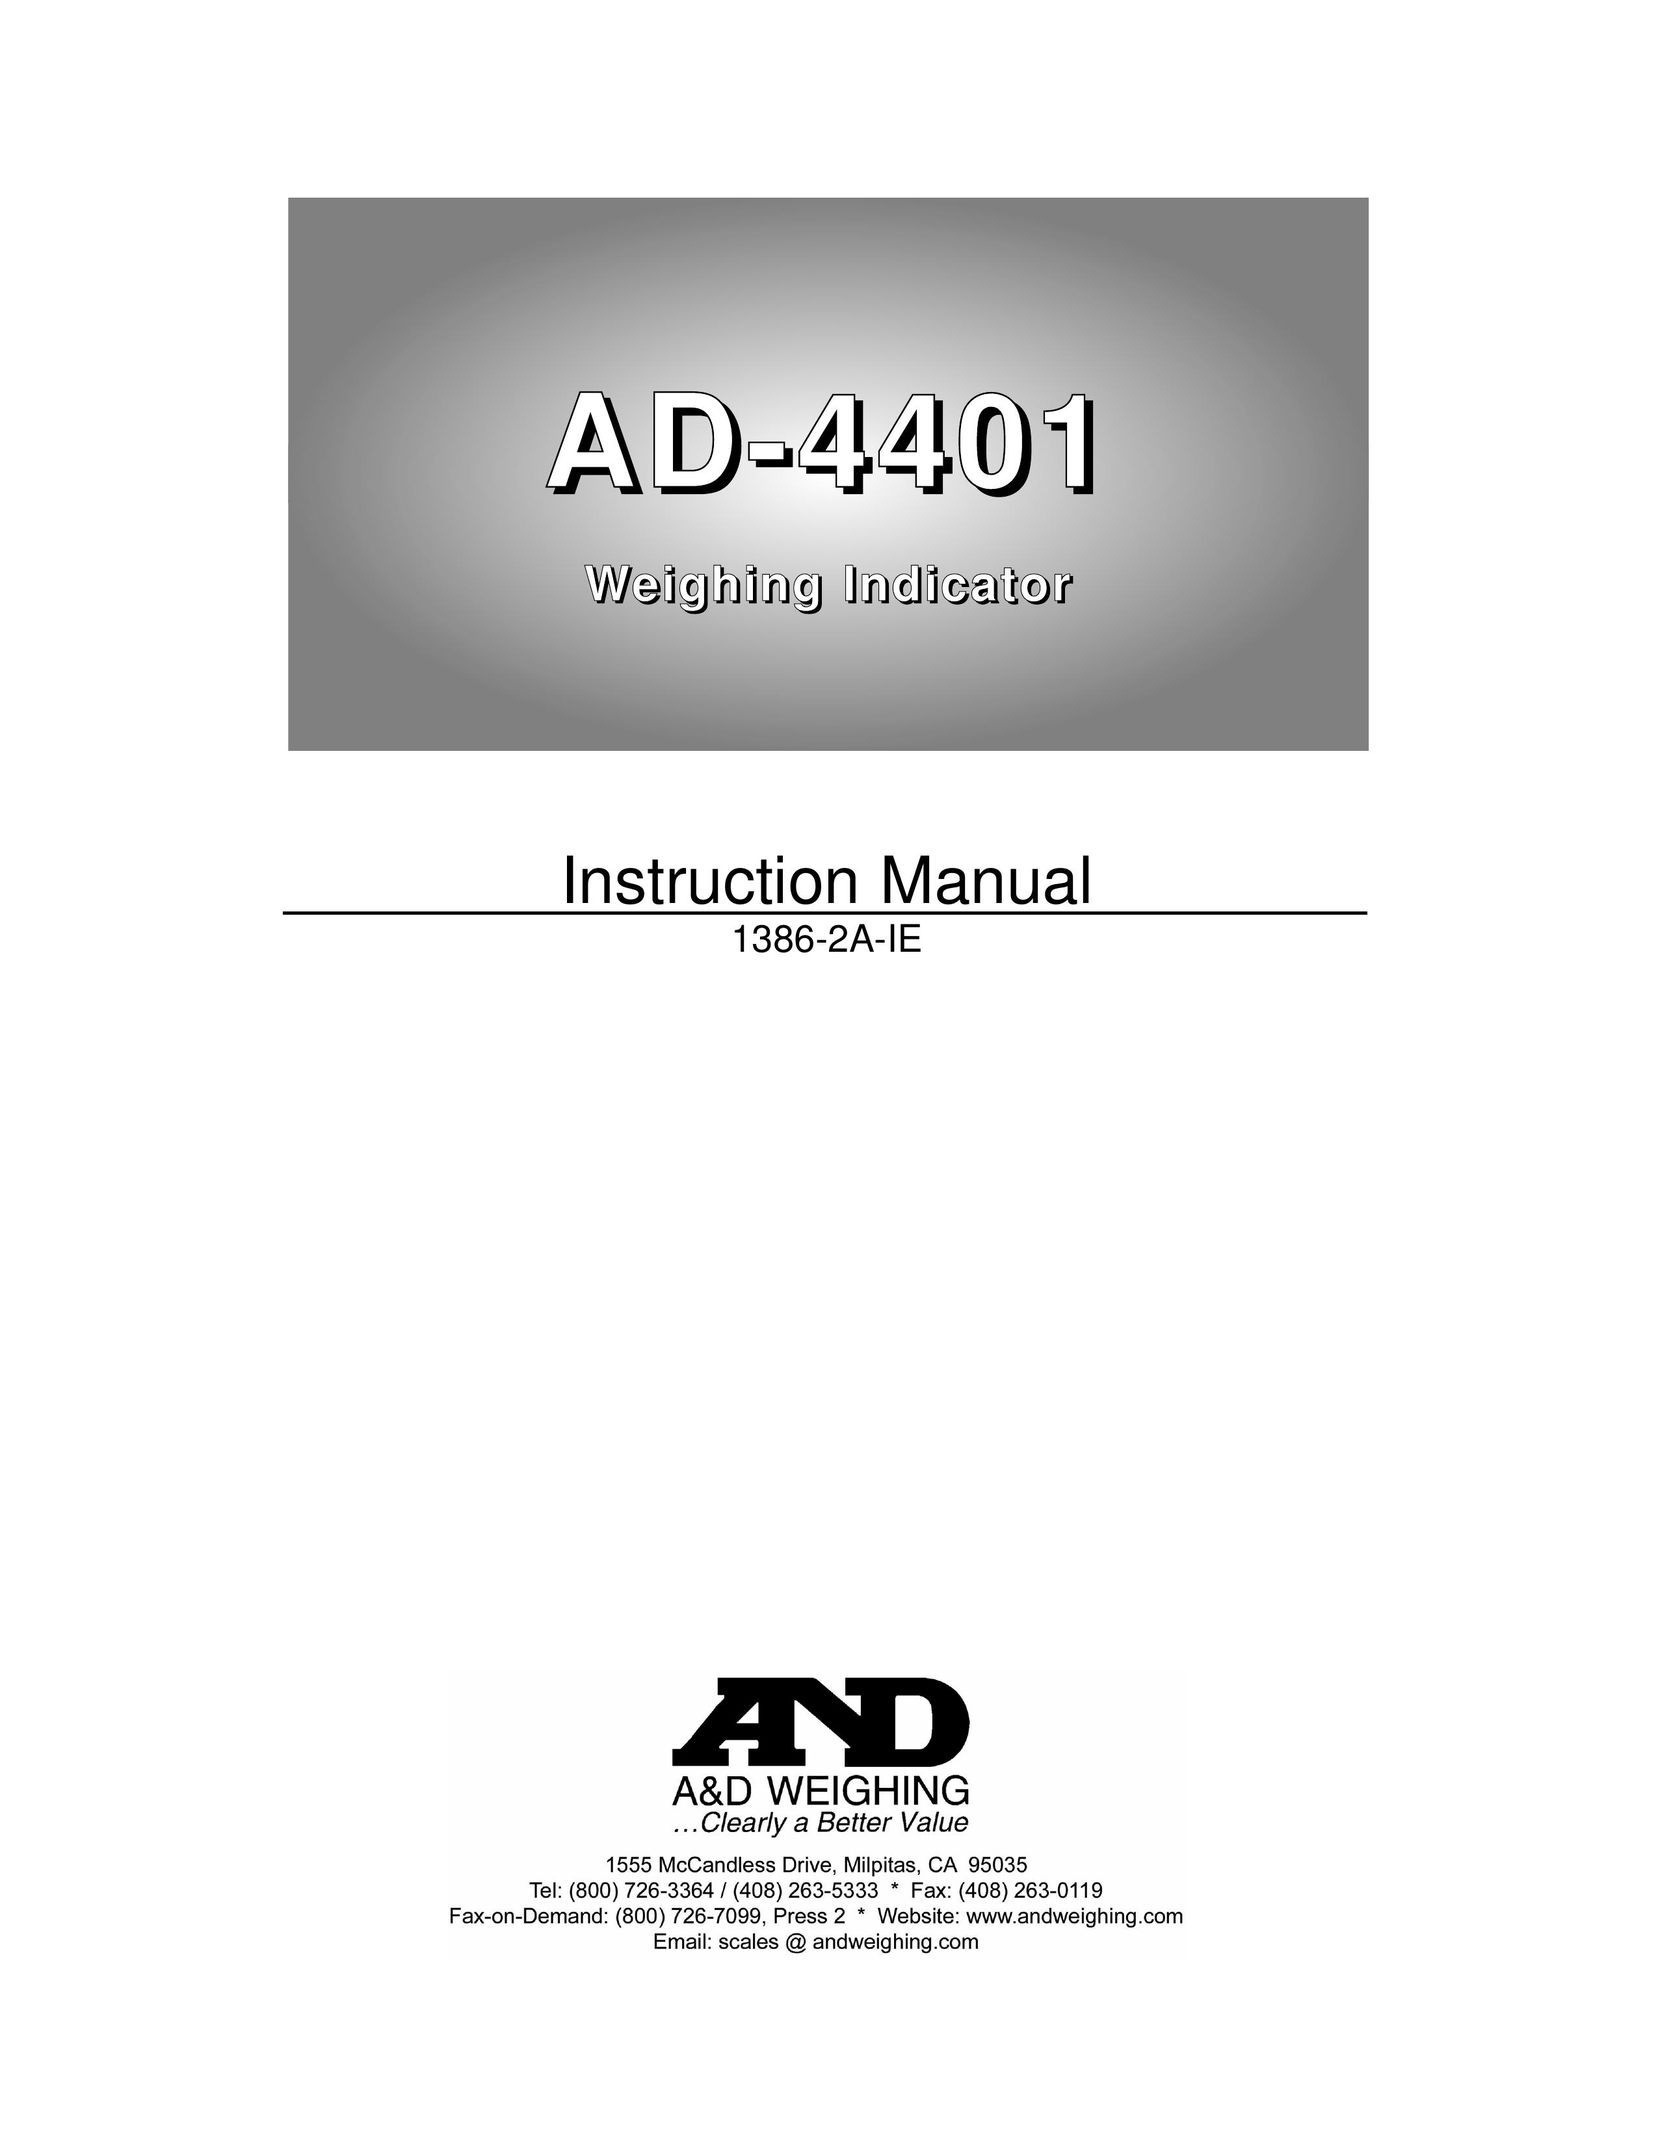 A&D AD-4401 Fitness Equipment User Manual